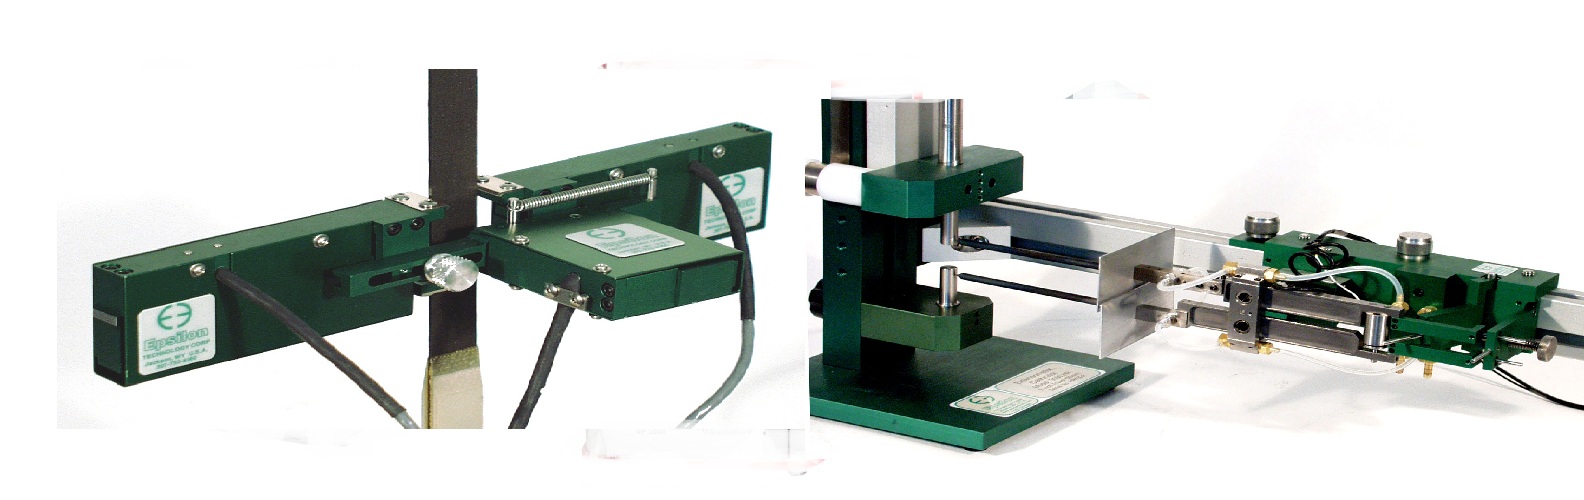 rubber process analyser importers,moving die rheometer Delhi,RPA suppliers,MDR,mooney viscomete importers India,shore hardness tester,IRHD,din abrasion,dispersion tester suppliers